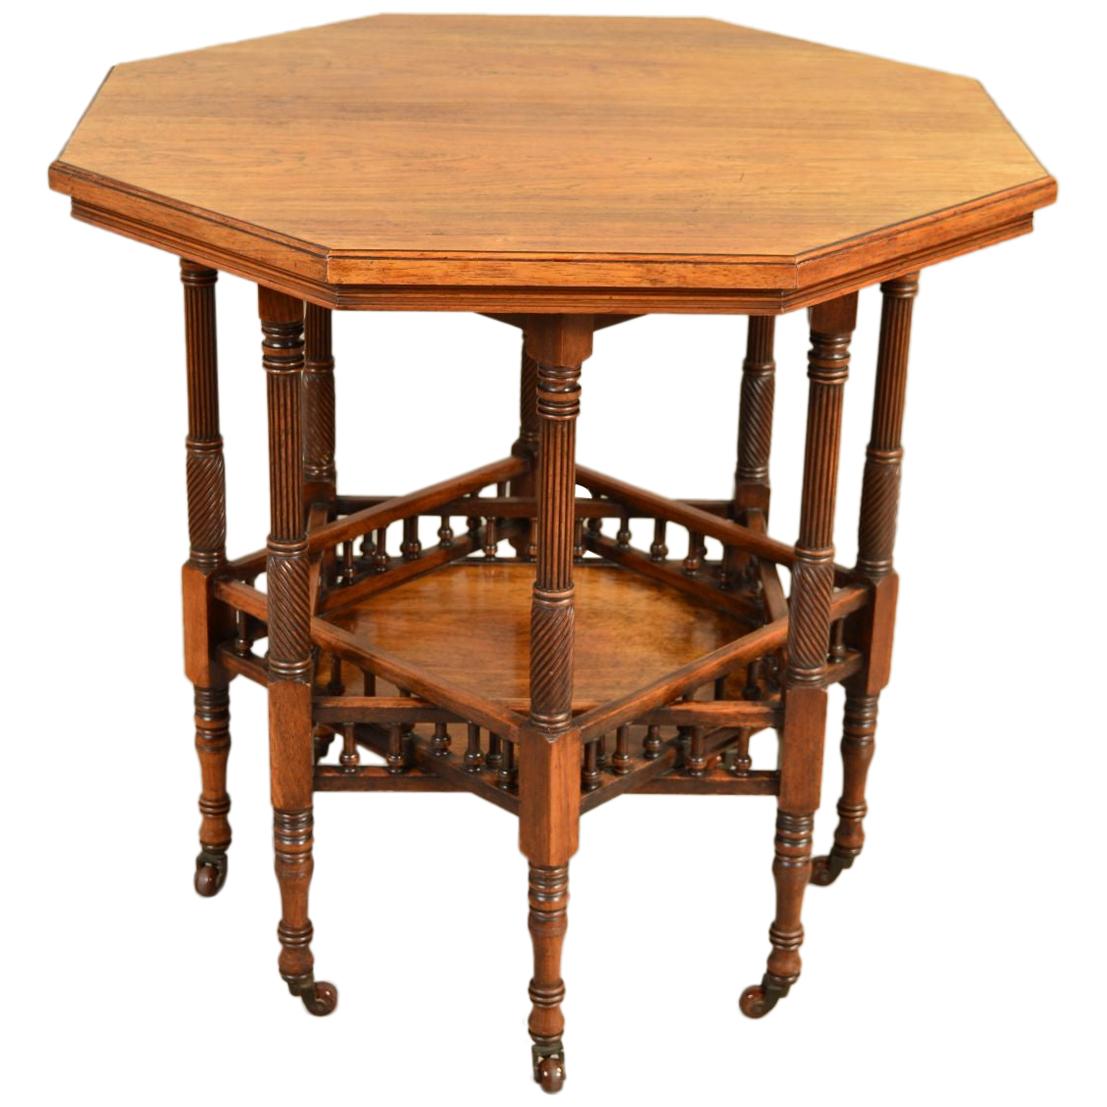 Gregory & Co Aesthetic Movement Eight Leg Octagonal Library Centre or Side Table